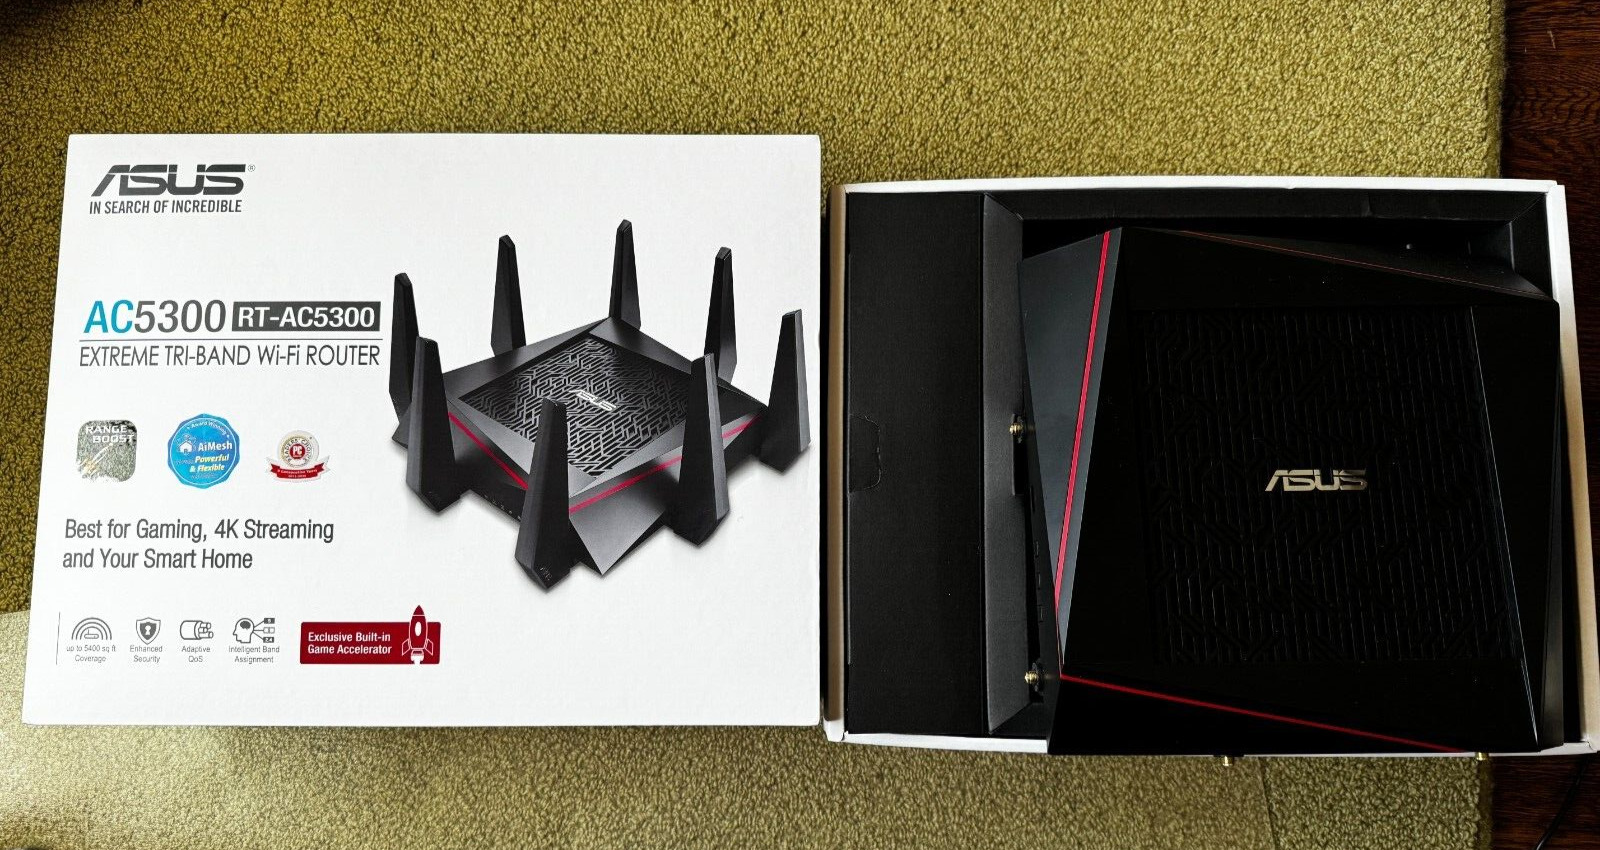 ASUS RT-AC5300 AC5300 Tri-Band WiFi Gaming Router 8 Antenna - Open Box Unused